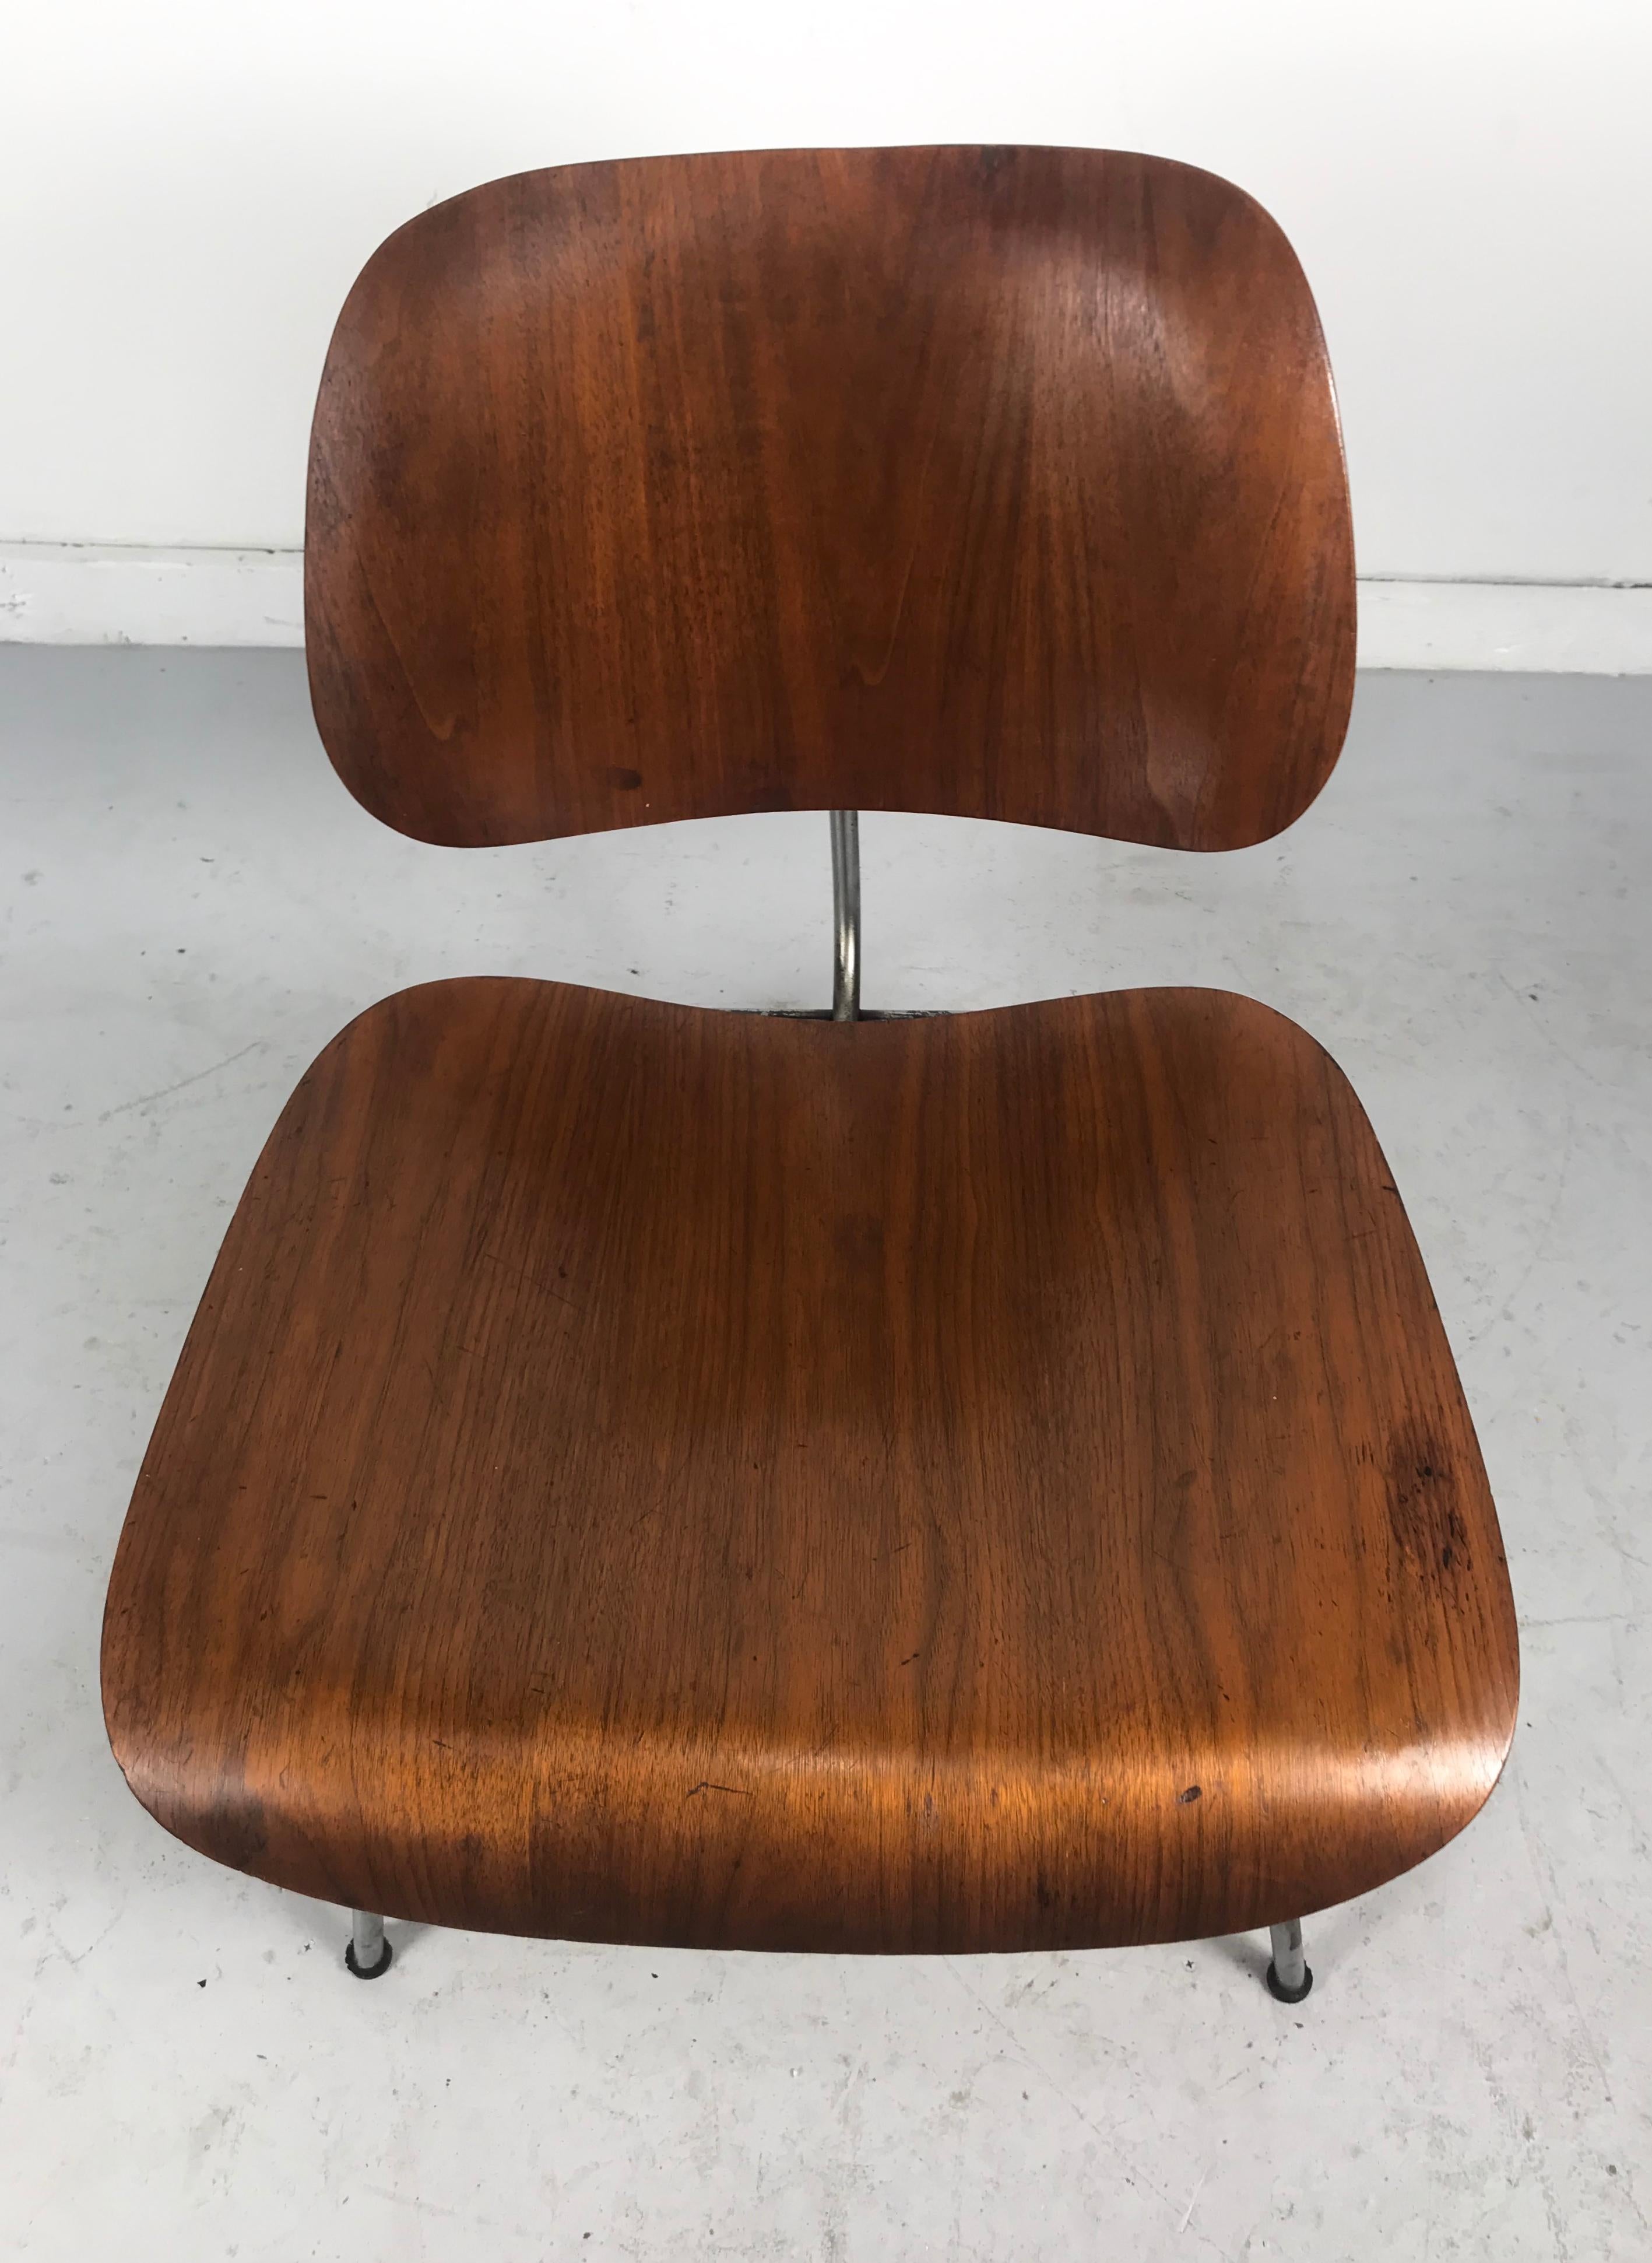 Early Production Charles Eames LCM 'Lounge Chair Metal', Original Label 3